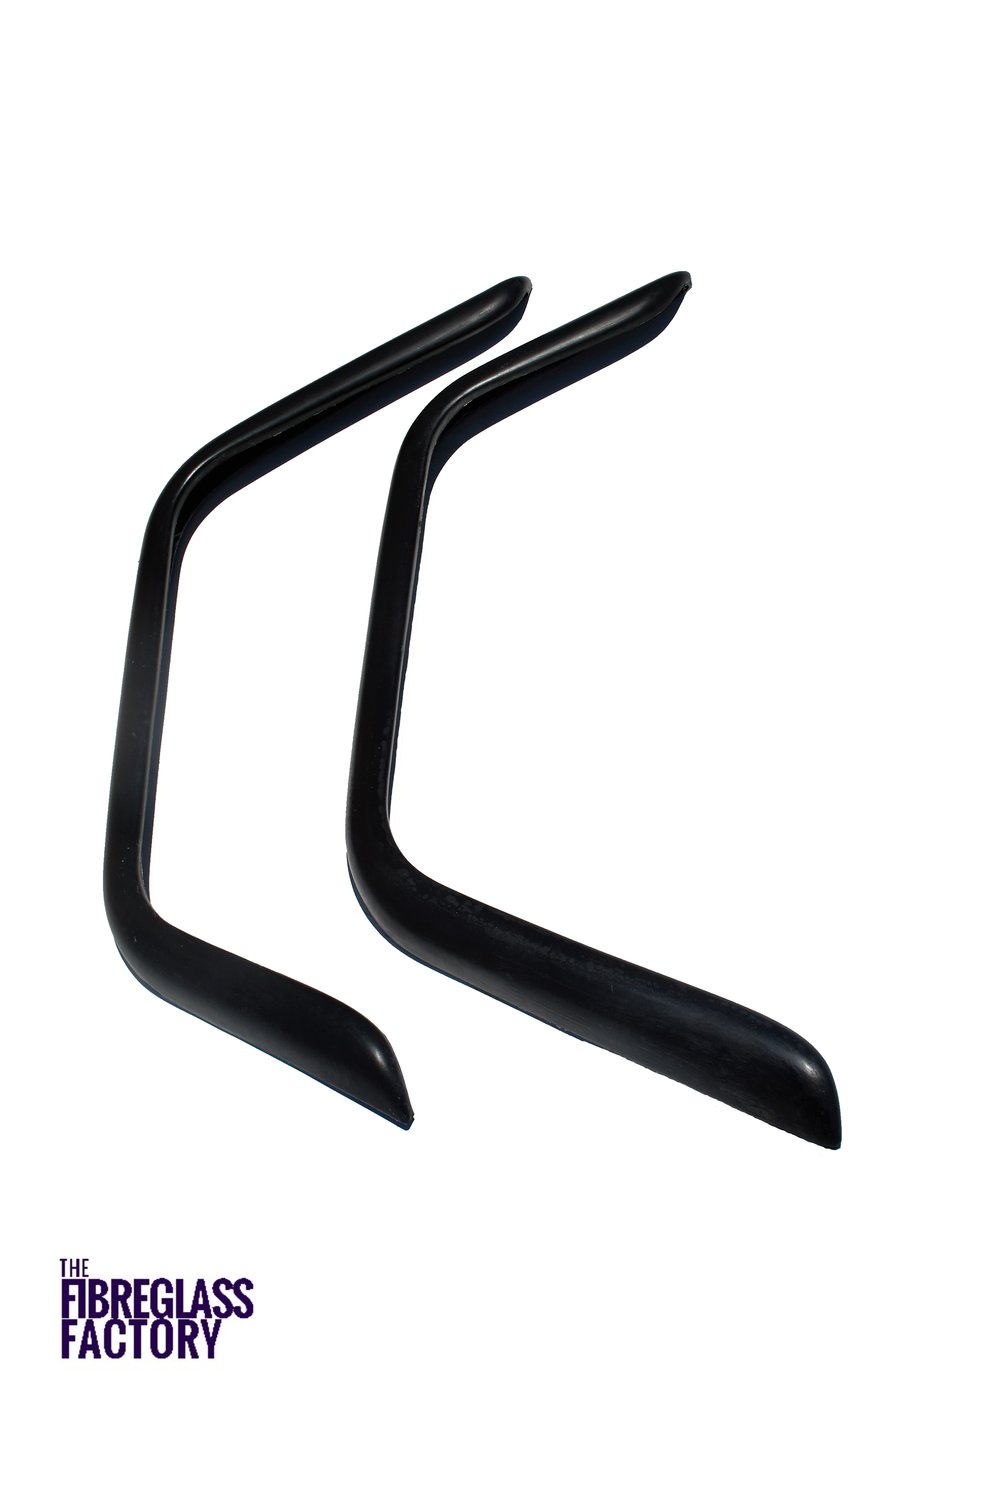 Image of 40 Series Front and Rear Fibreglass Flares 60mm wide + Fitting Kit